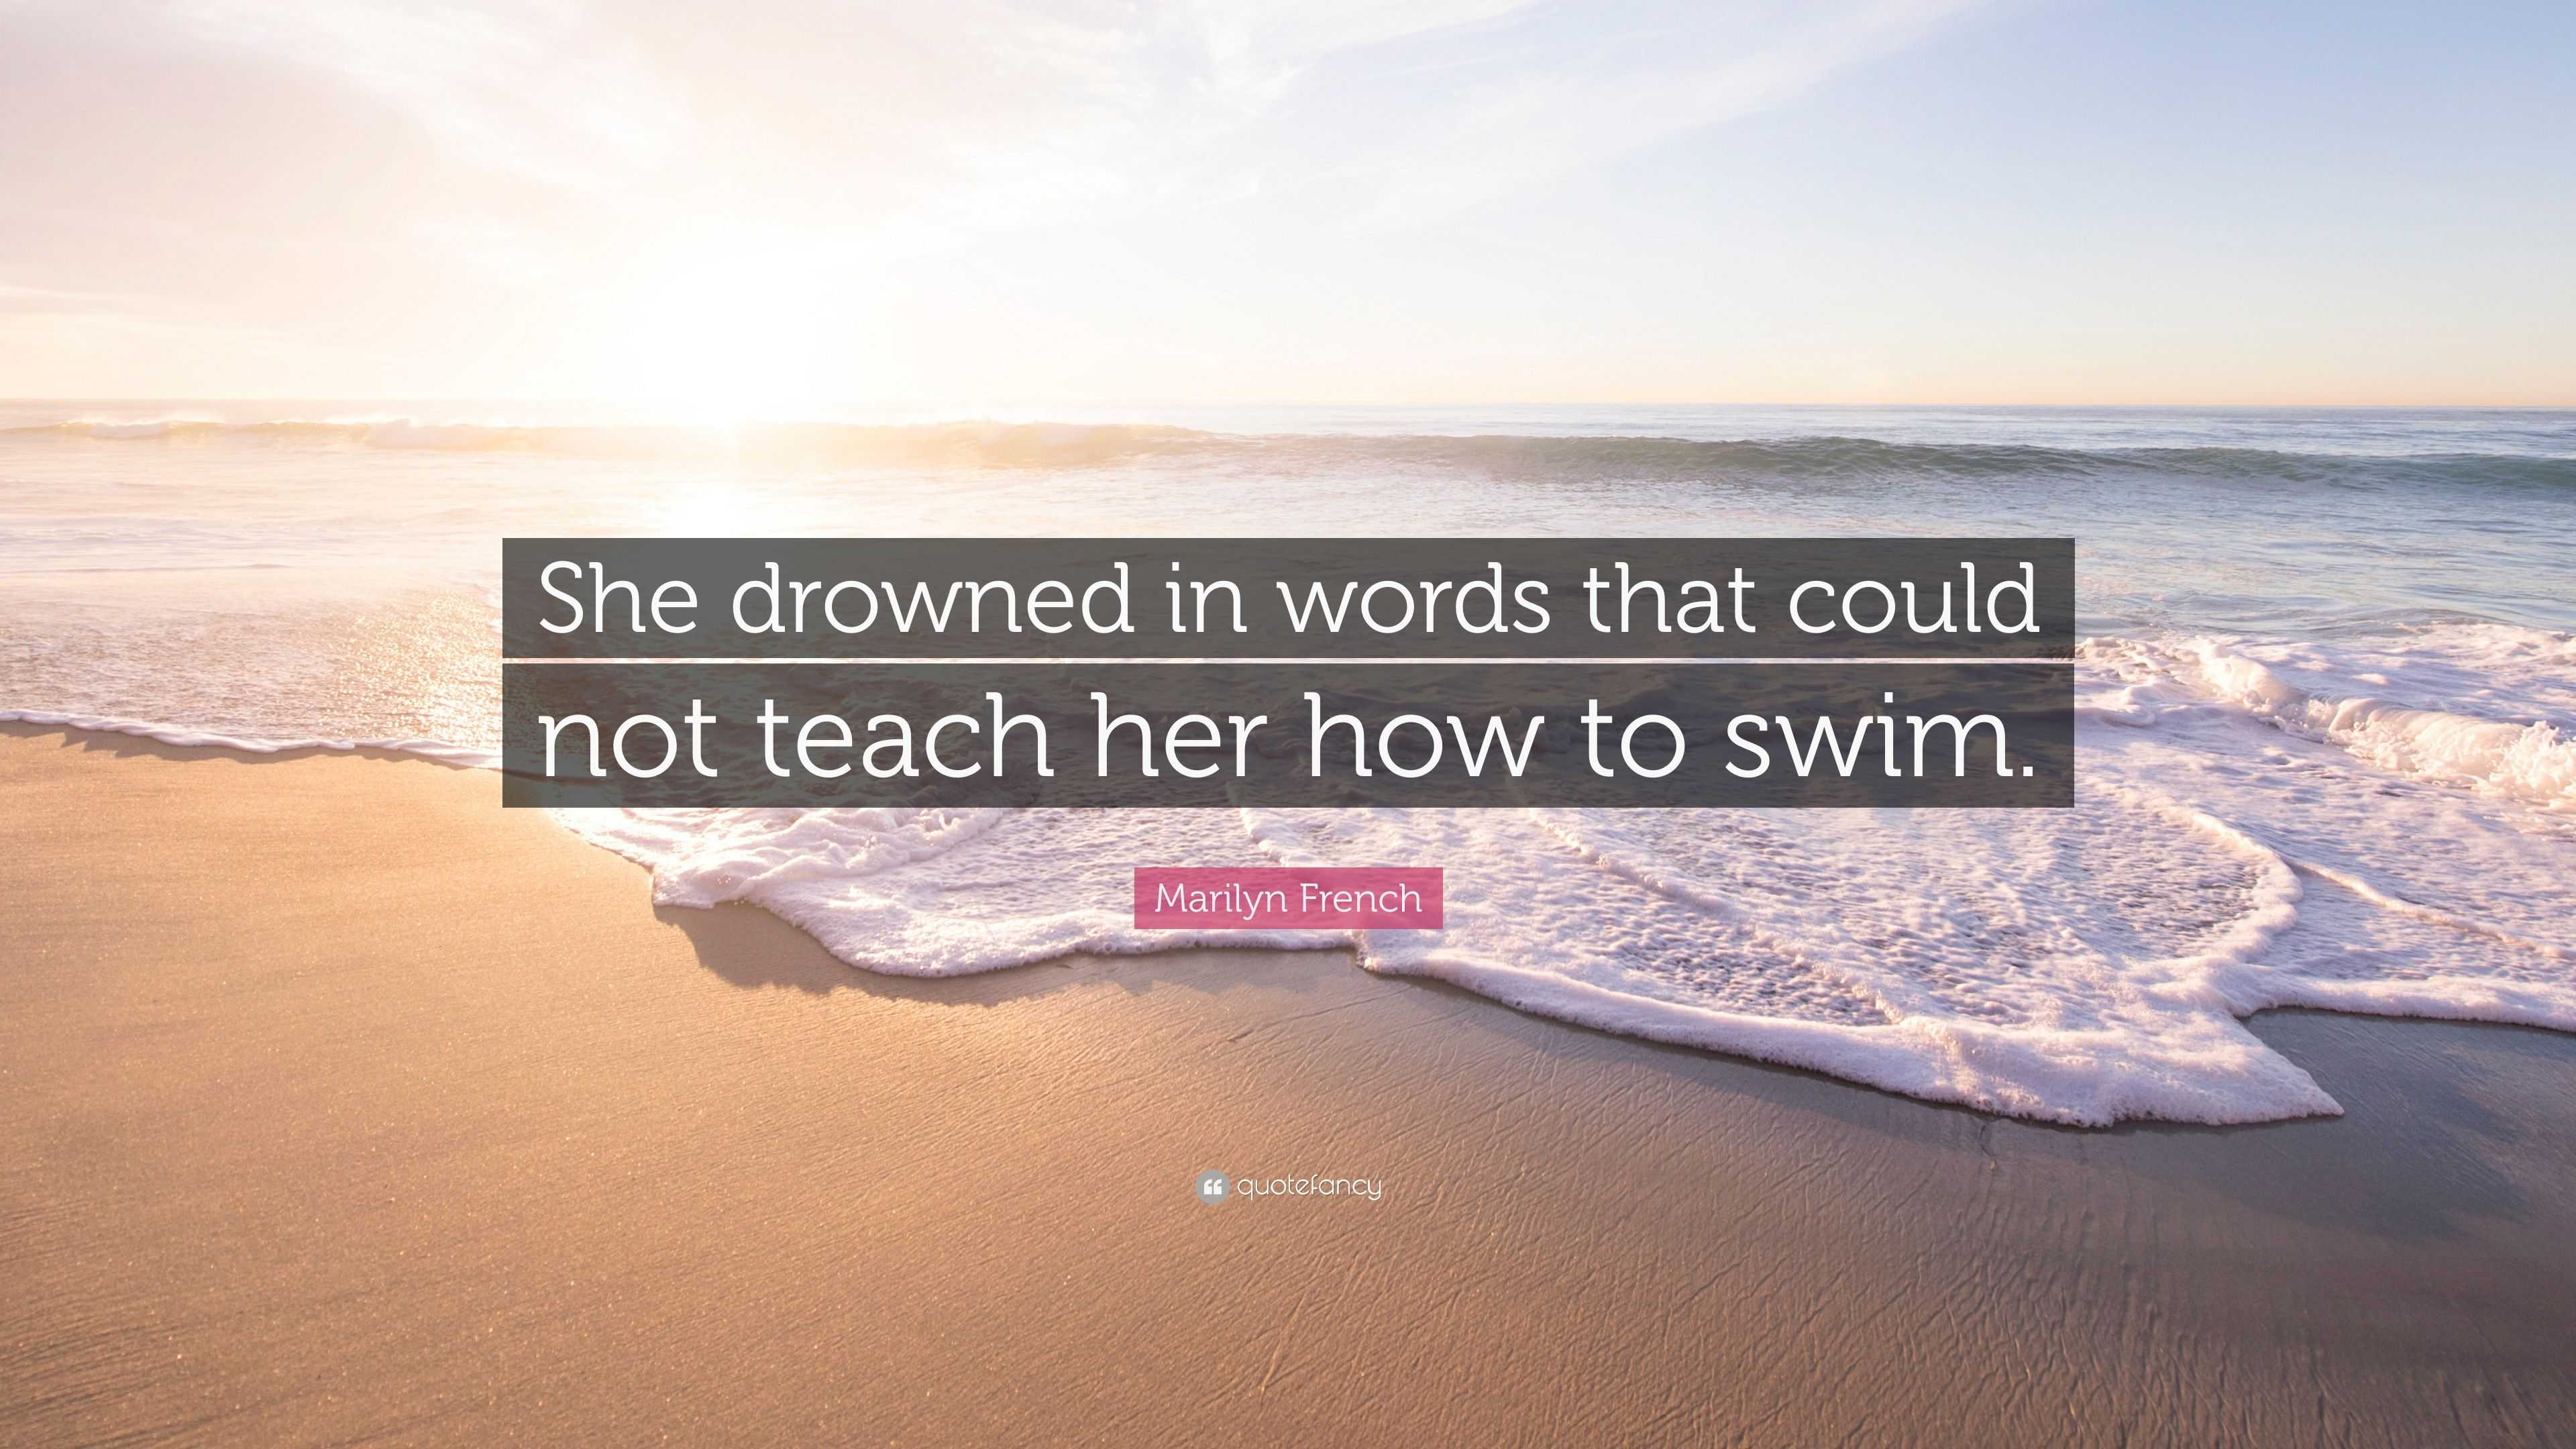 Marilyn French Quote: “She drowned in words that could not teach her how to  swim.”